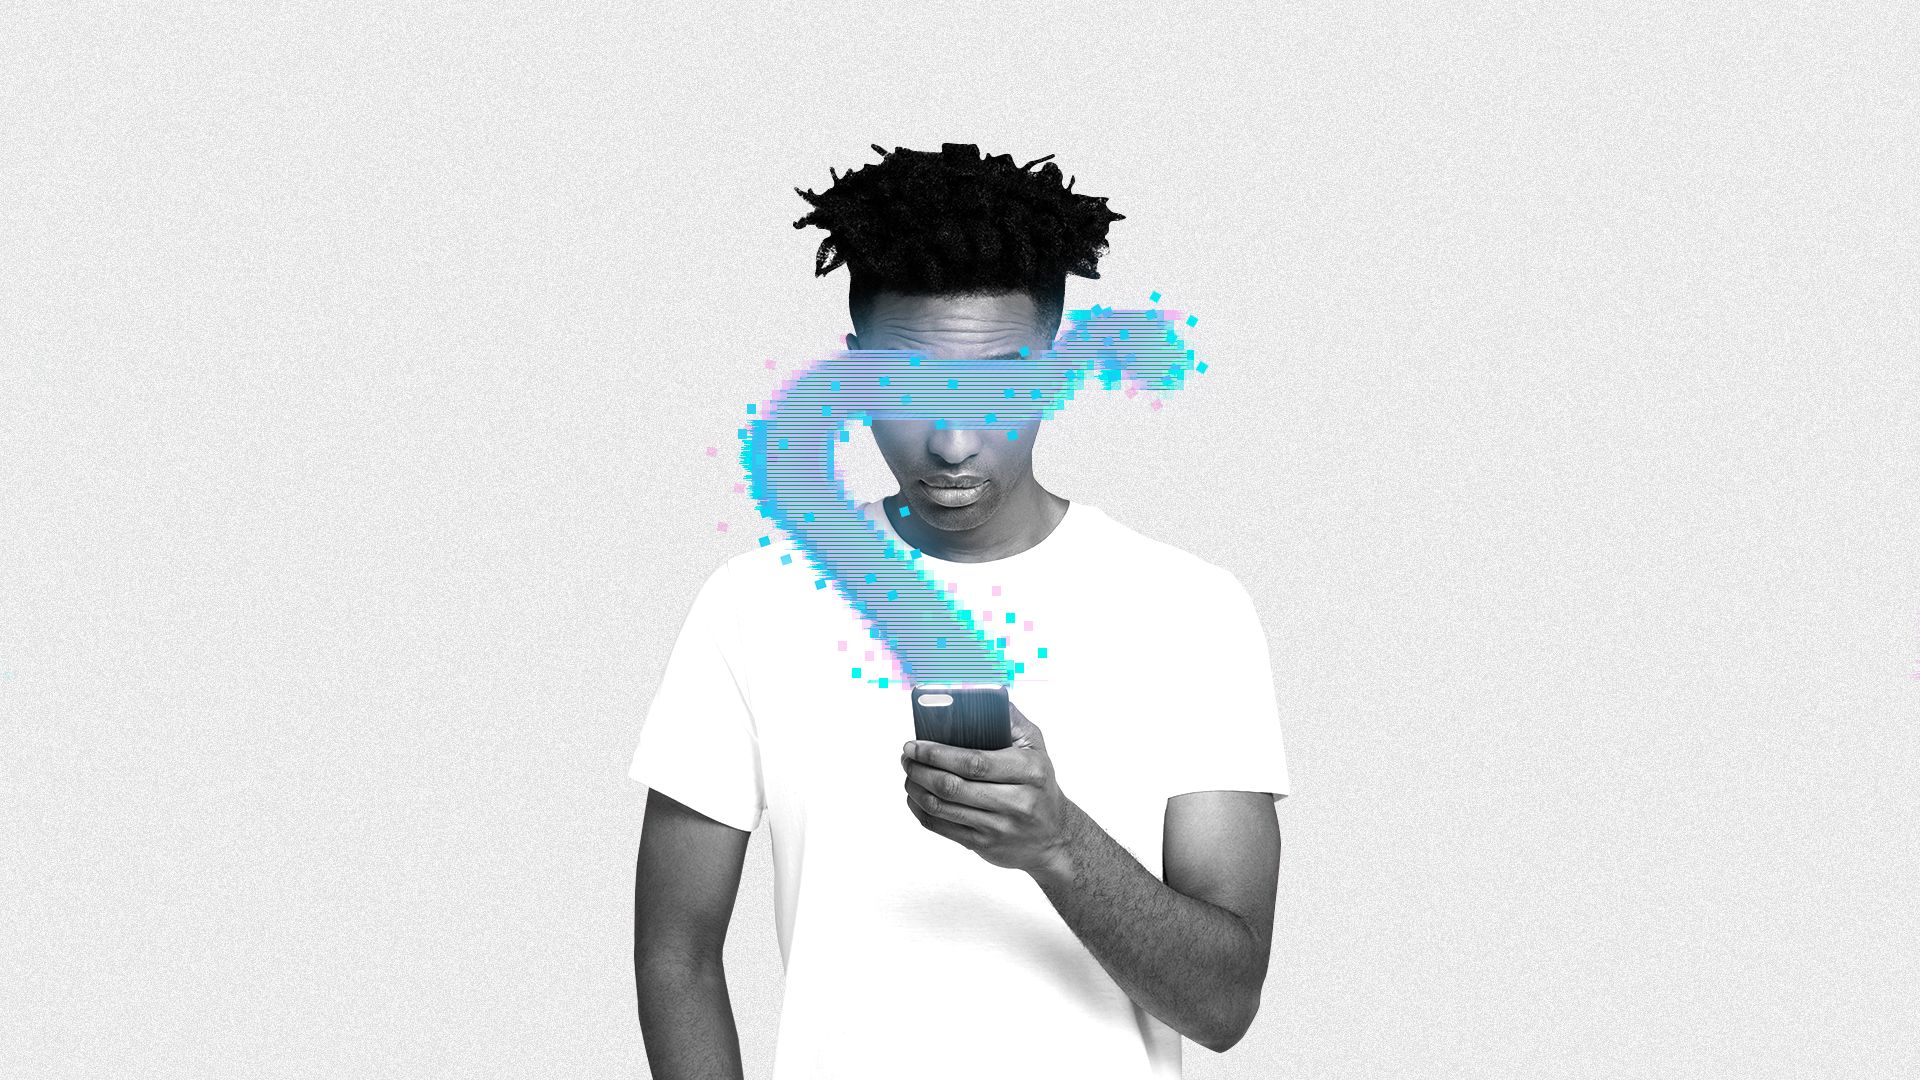 In this illustration, a man holds an iphone as pixels cover his face